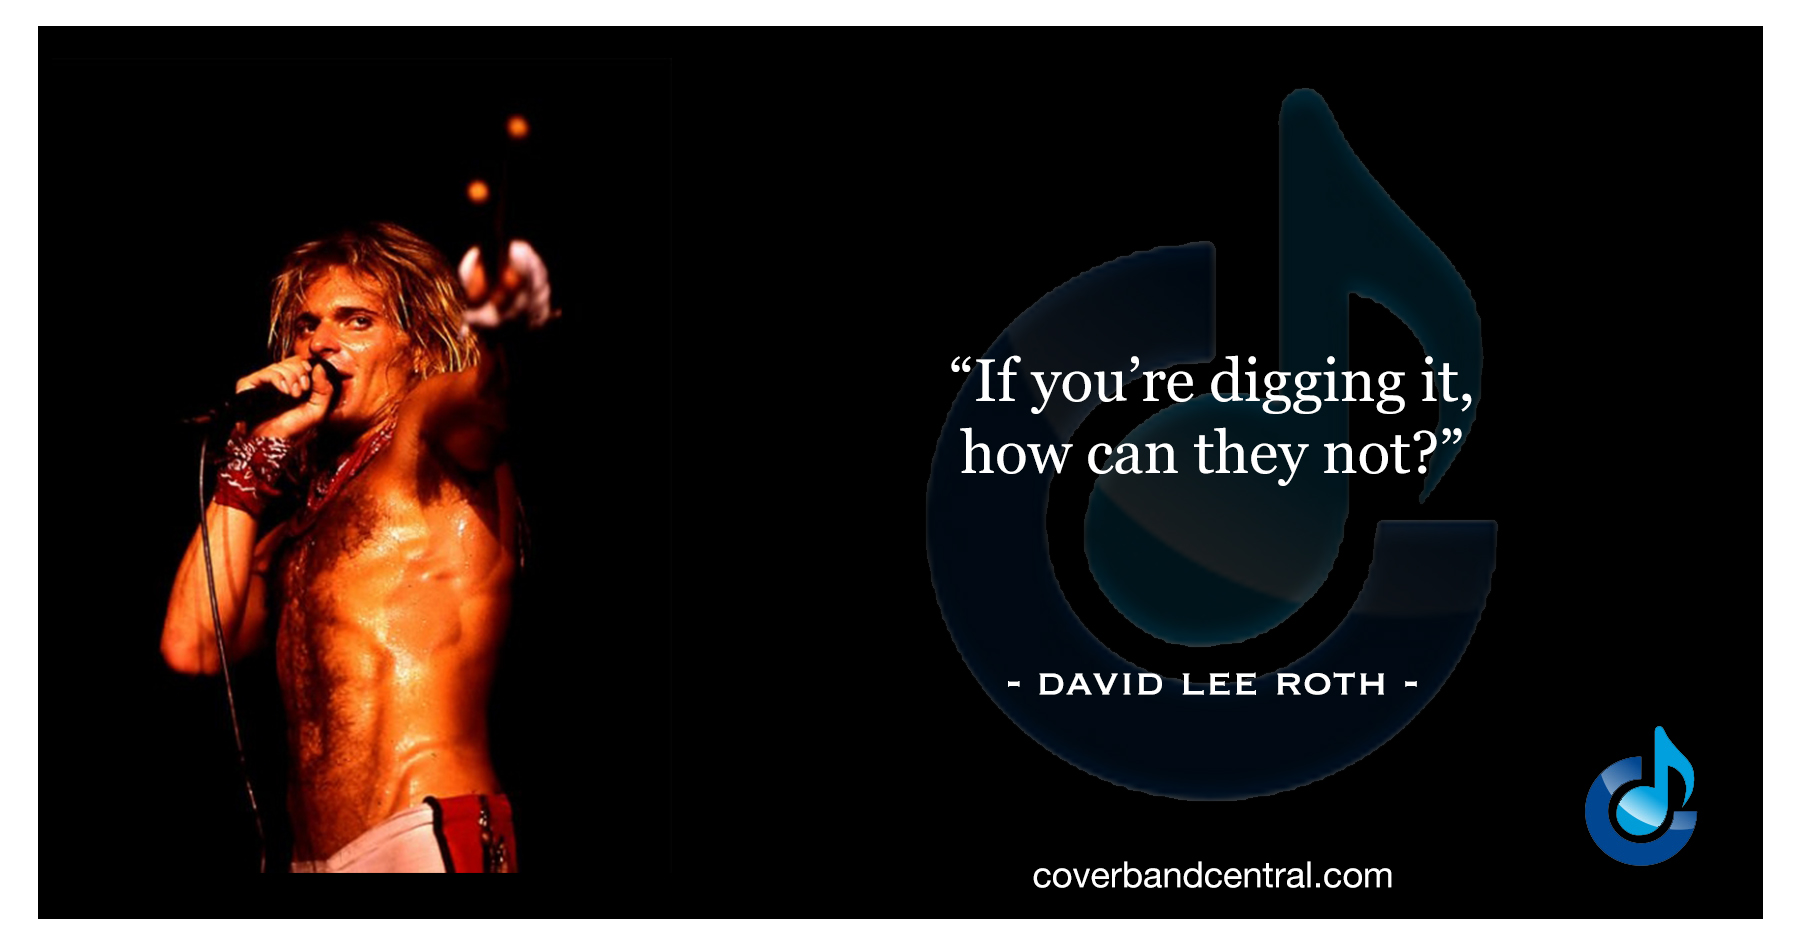 David Lee Roth quote